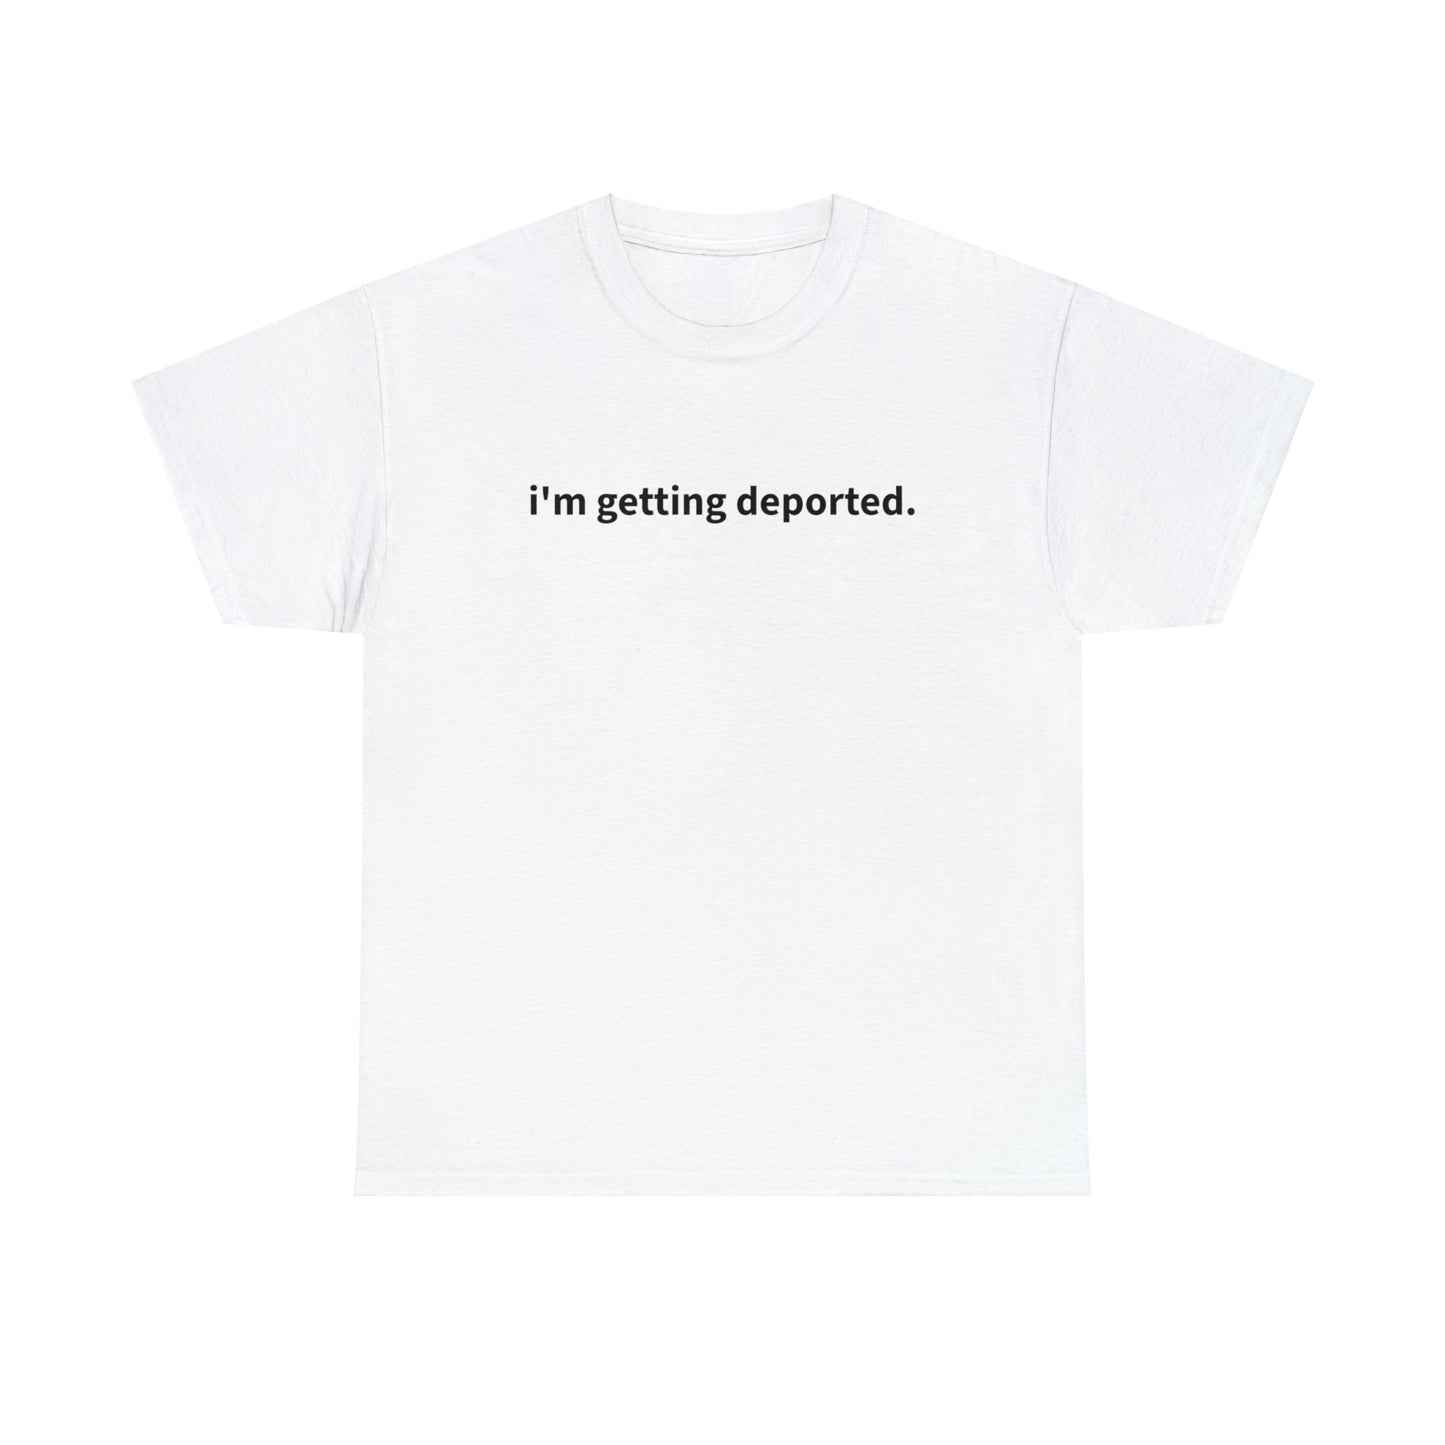 "i'm getting deported" T-Shirt!